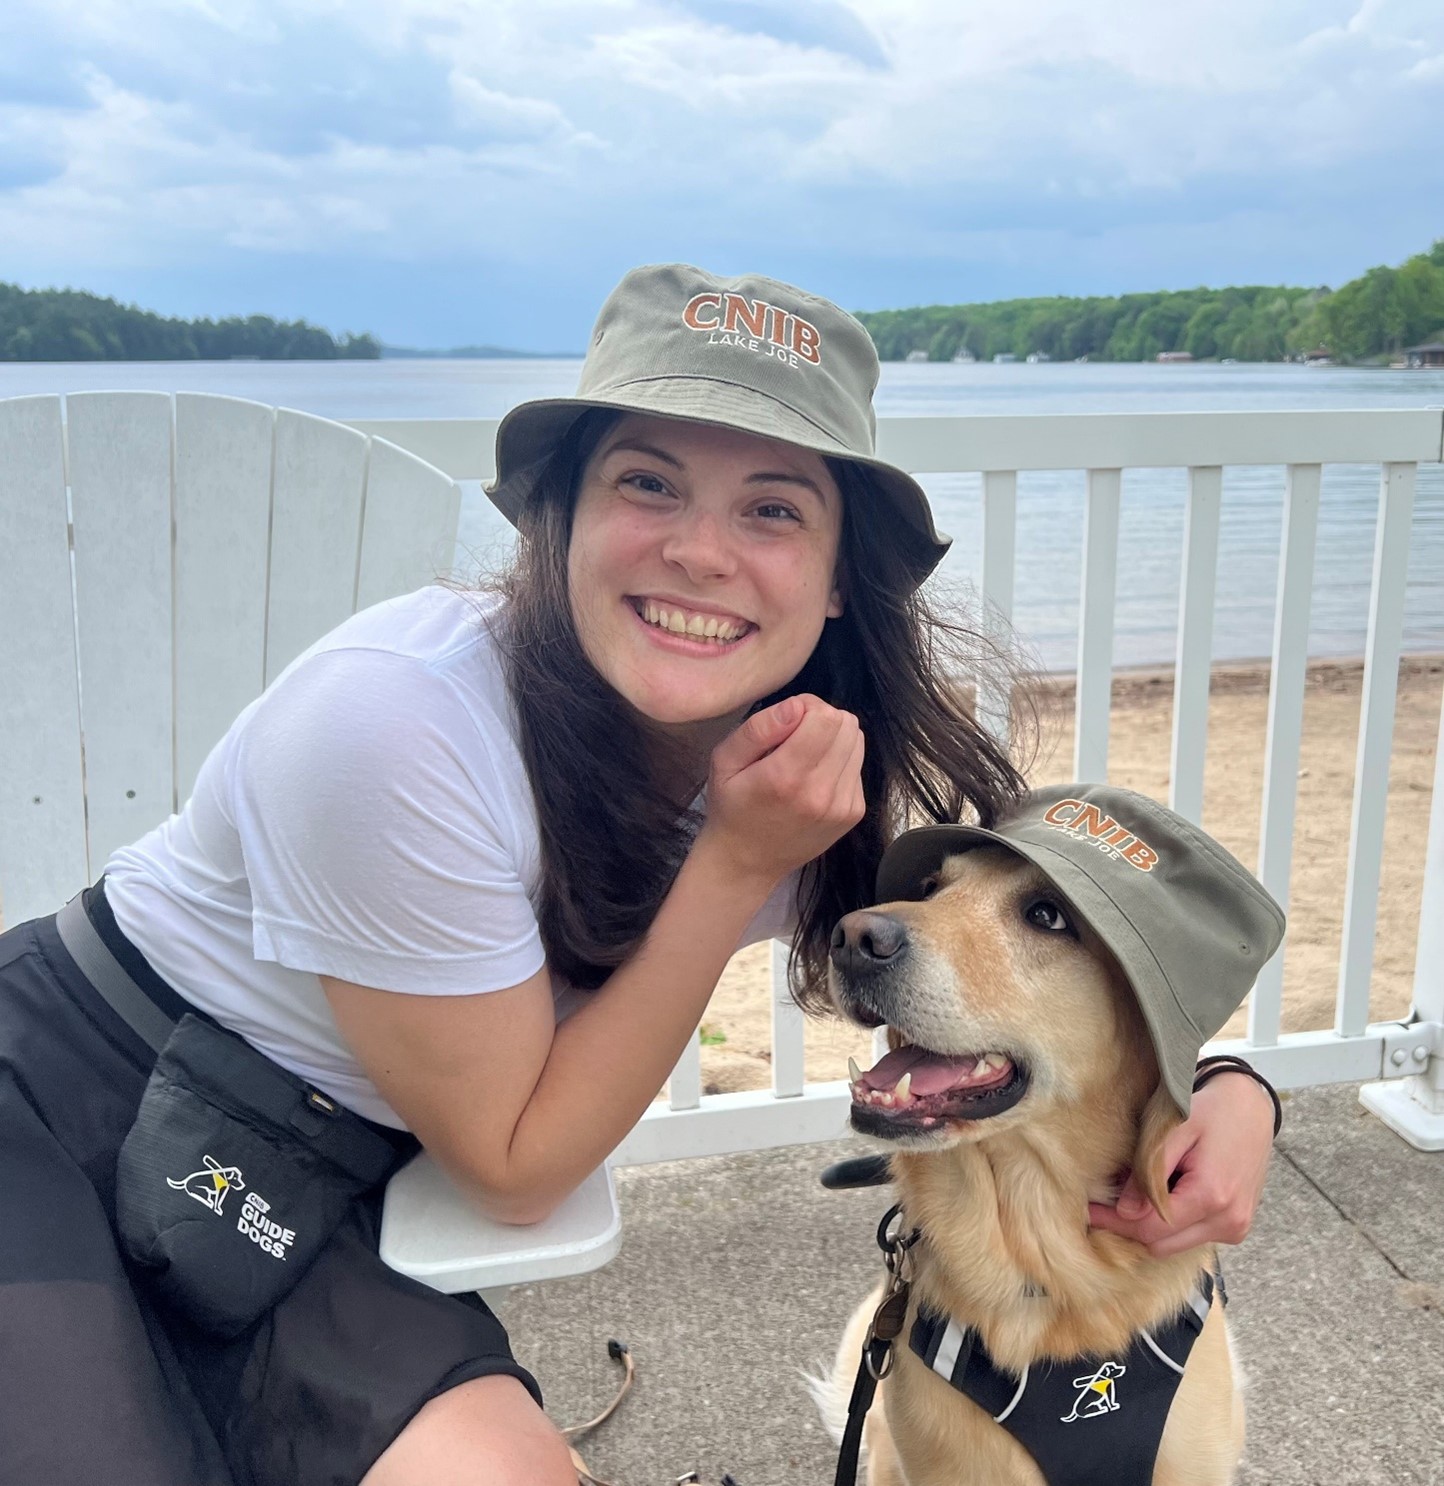 A young woman is sitting on a white Muskoka chair with Lake Joseph behind her. She has her arm around a yellow labrador retriever. Both are wearing CNIB lake Joe bucket hats. The woman is smiling at the camera and the dog is looking at the woman.